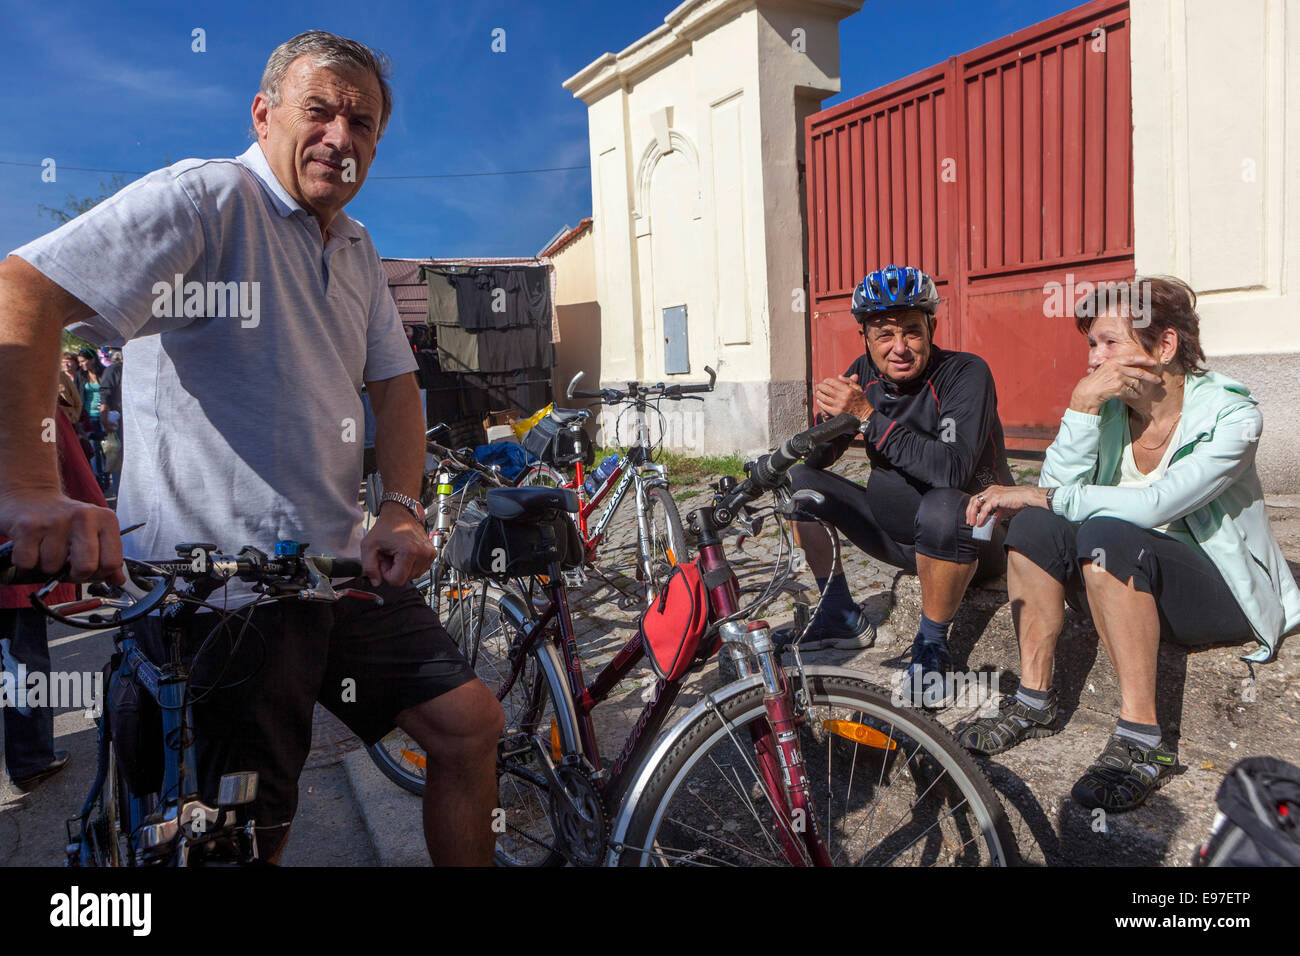 Active aging people, Resting cyclists, bikers, seniors, Czech Republic Stock Photo